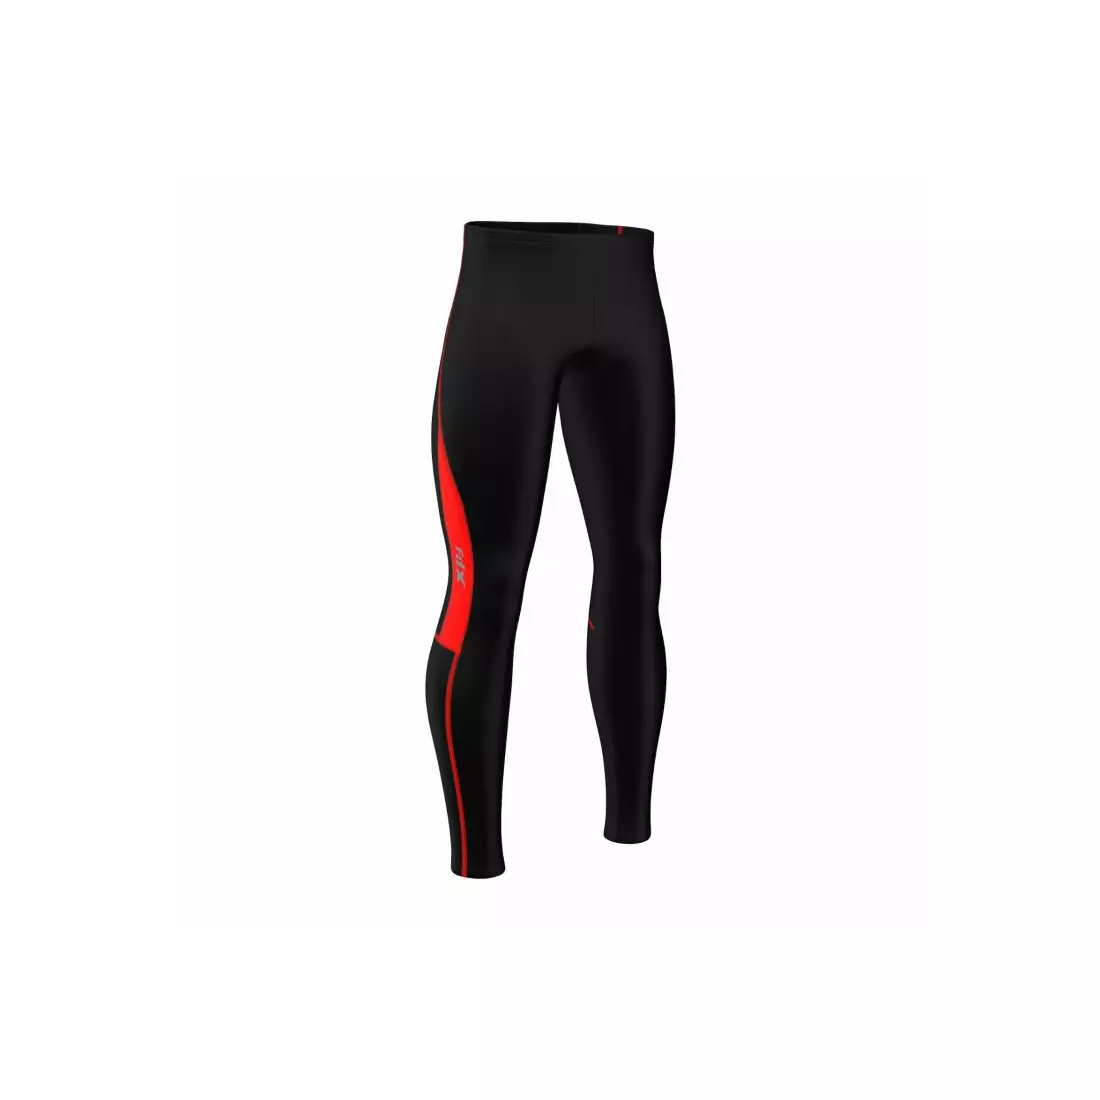 FDX 1810 men's insulated cycling trousers without braces, black and red